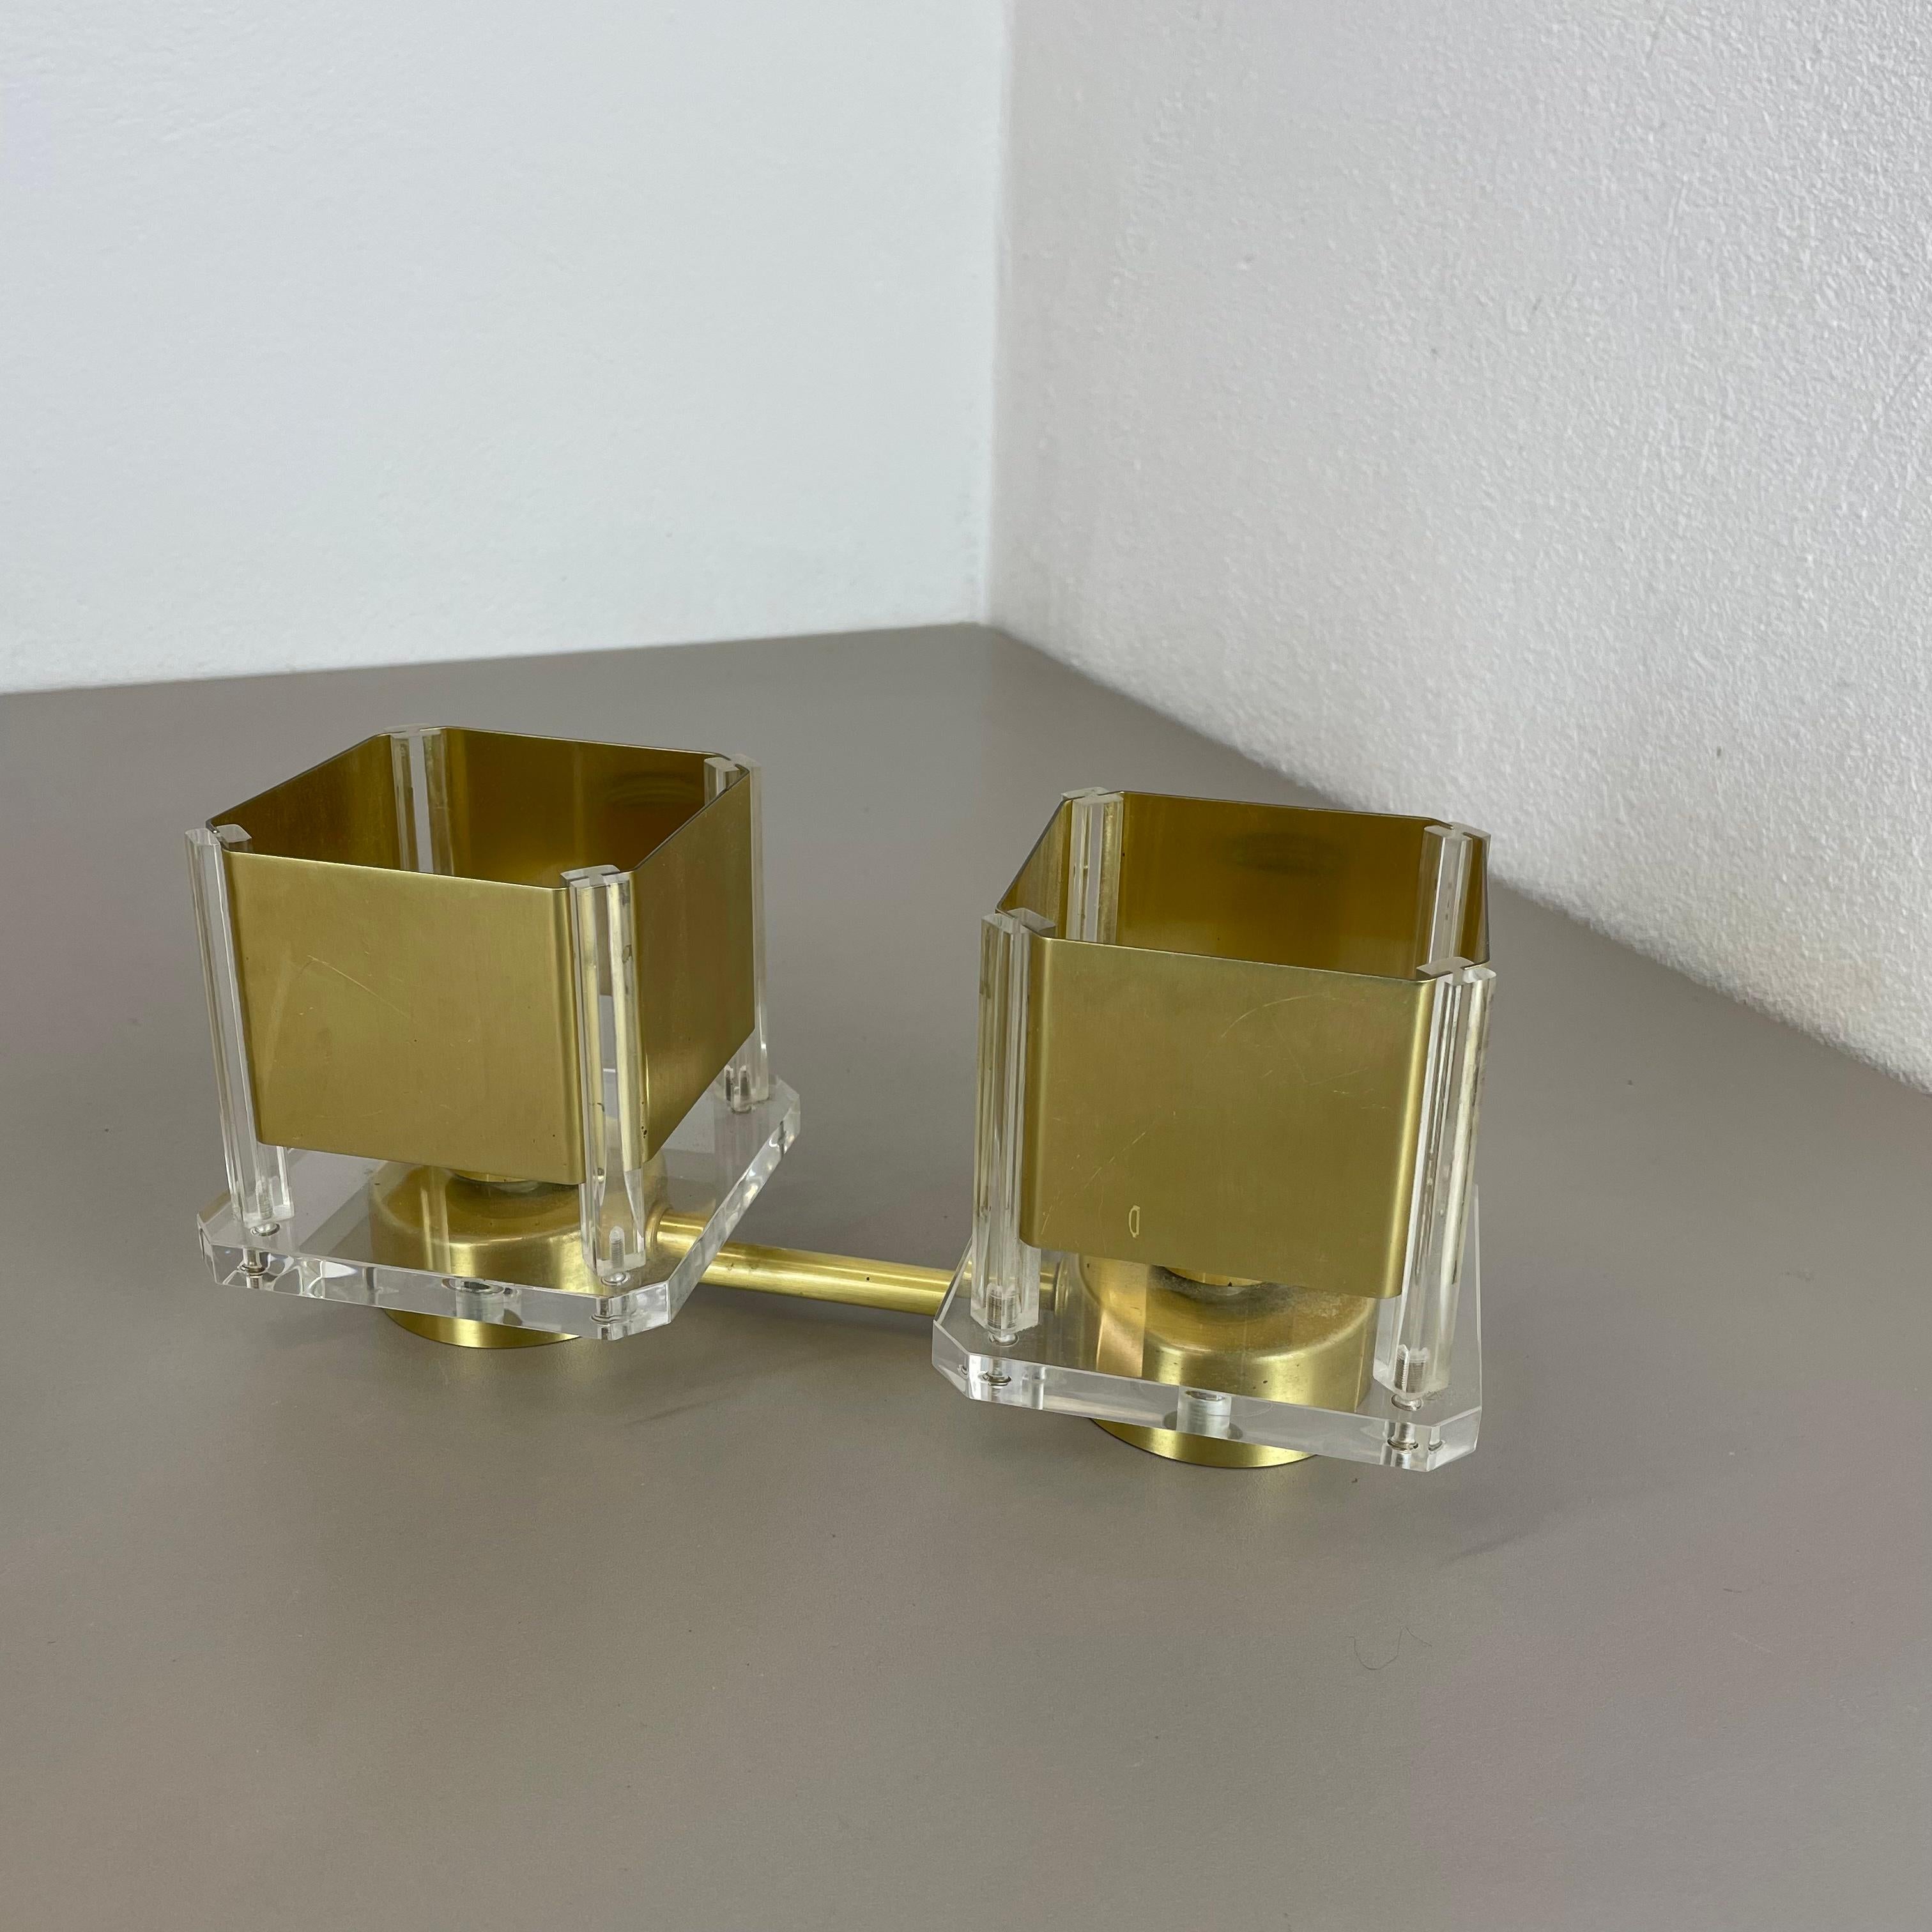 Set of 2 Brass + Acryl Glass Cubic Stilnovo Style Wall Light Sconces, Italy 1970 For Sale 8